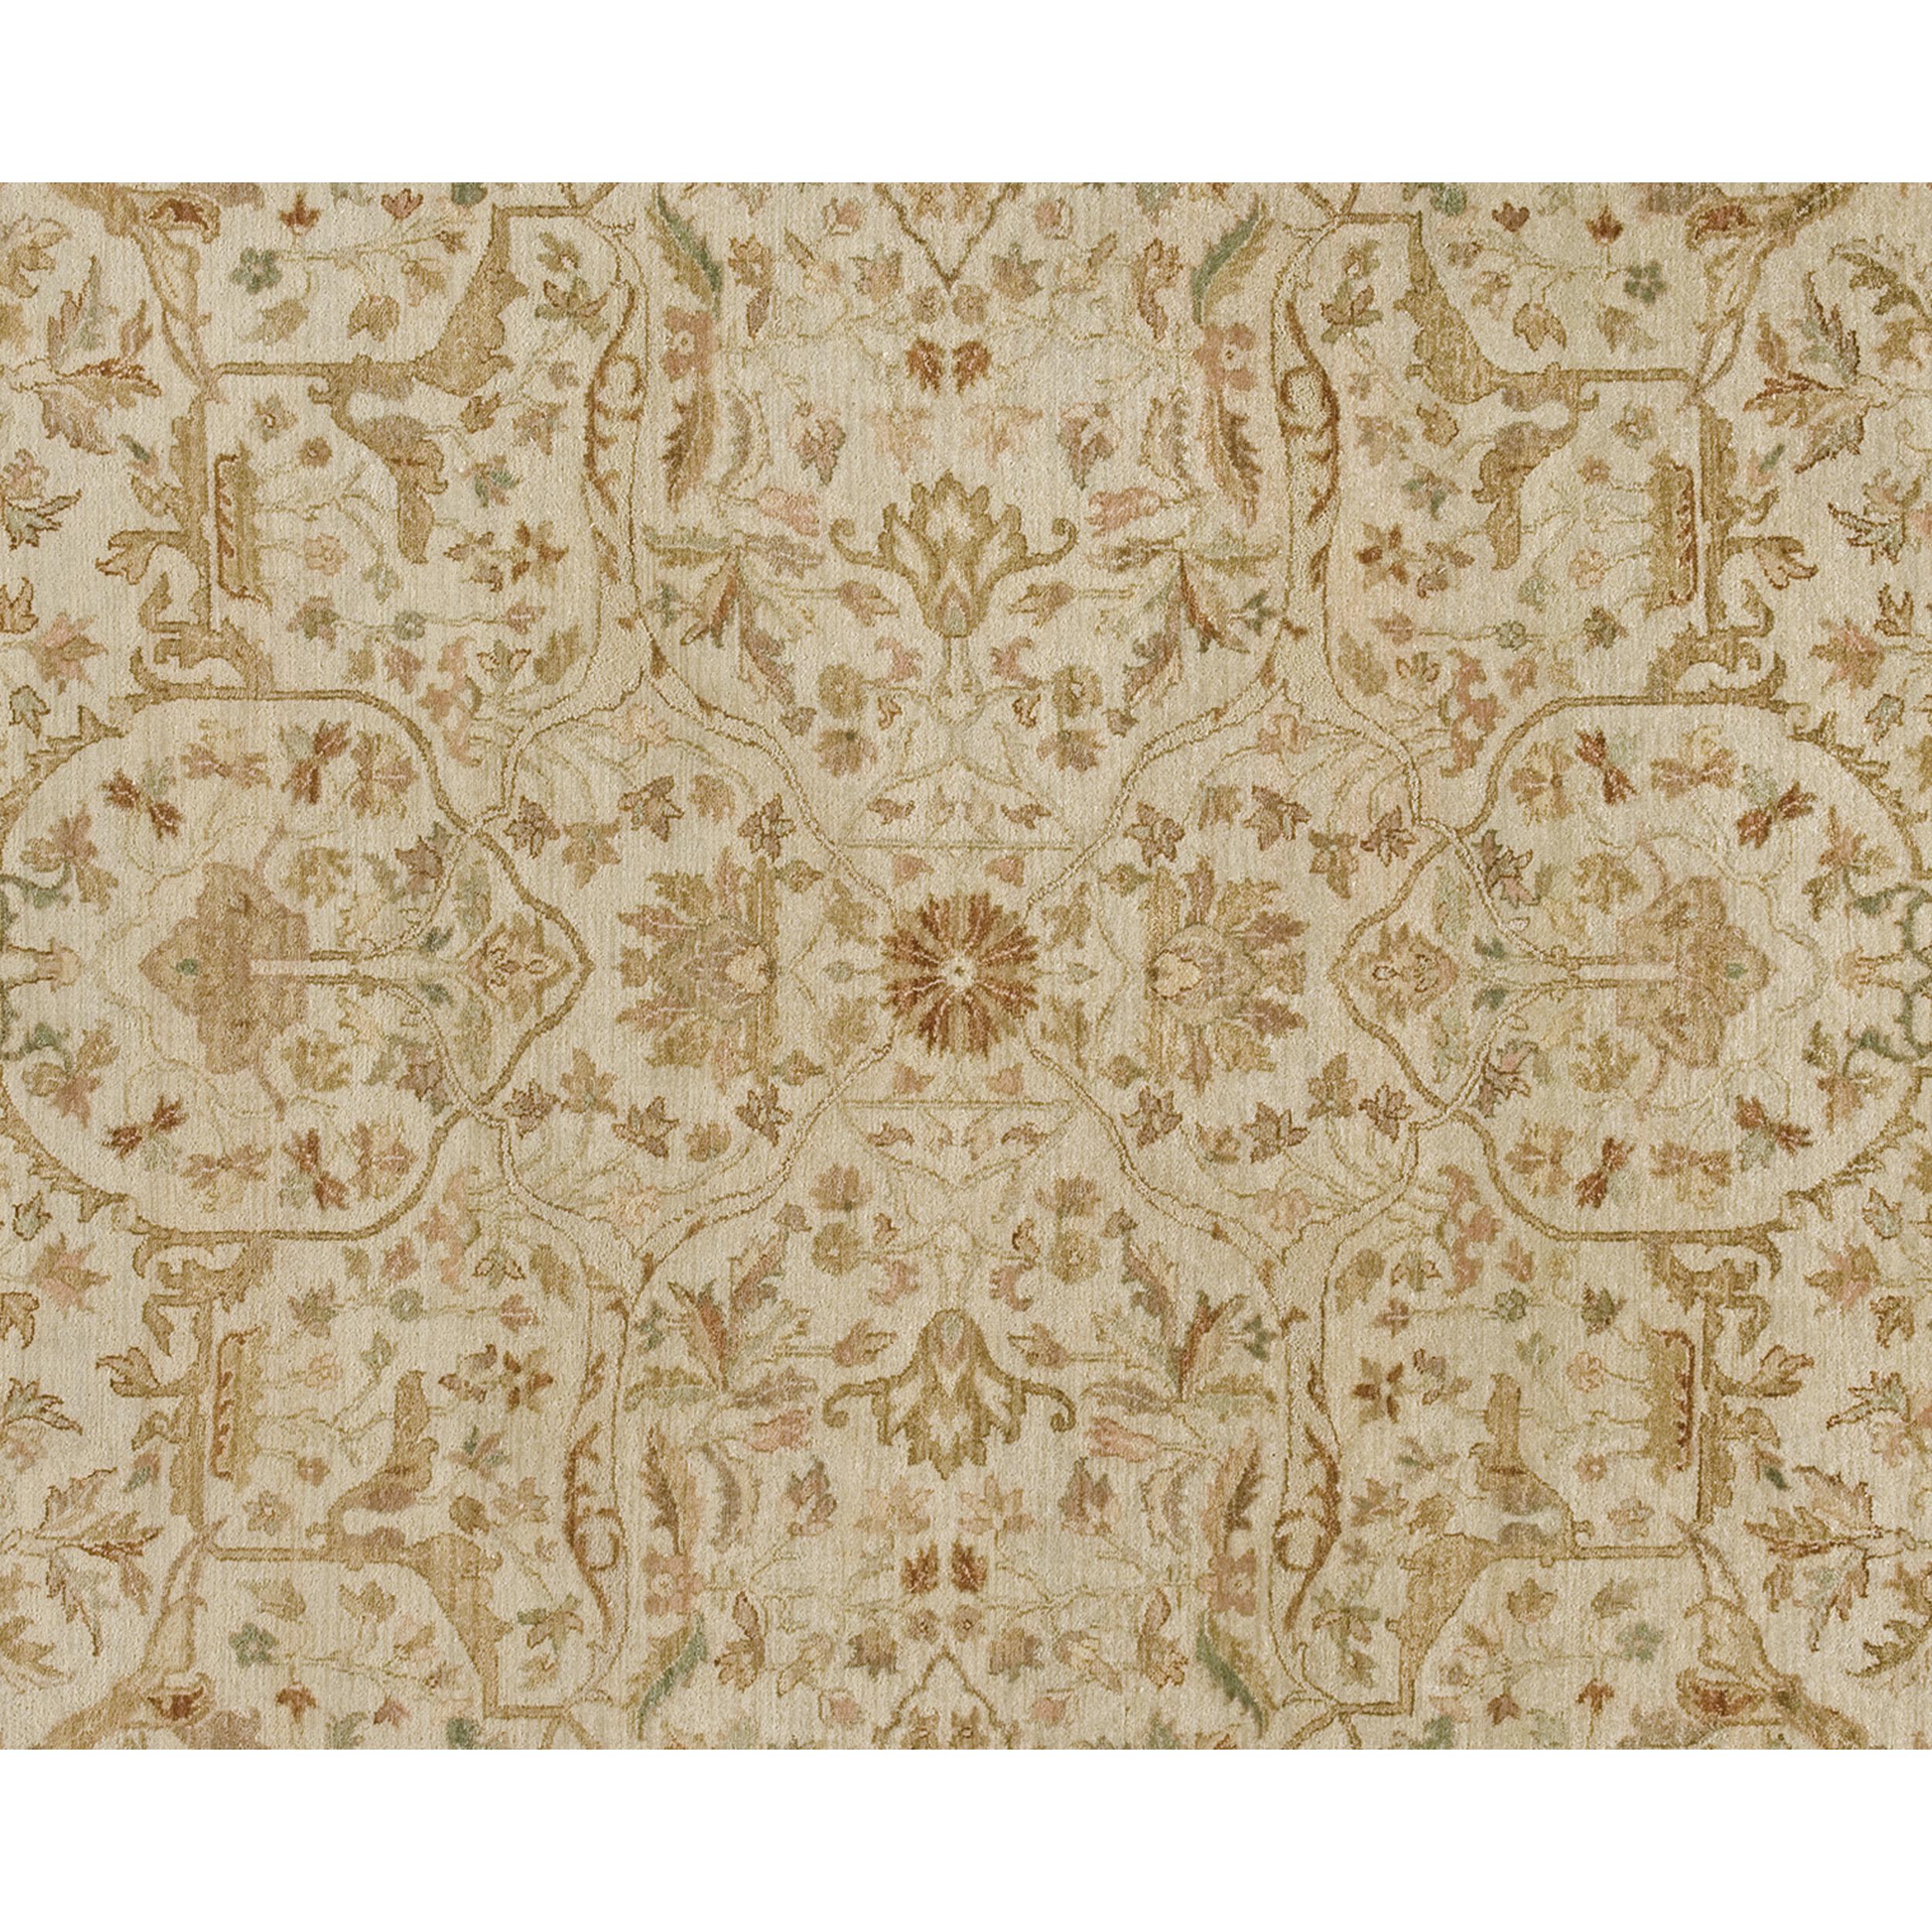 Agra Luxury Traditional Hand-Knotted Ivory/Bronze 12x18 Rug For Sale